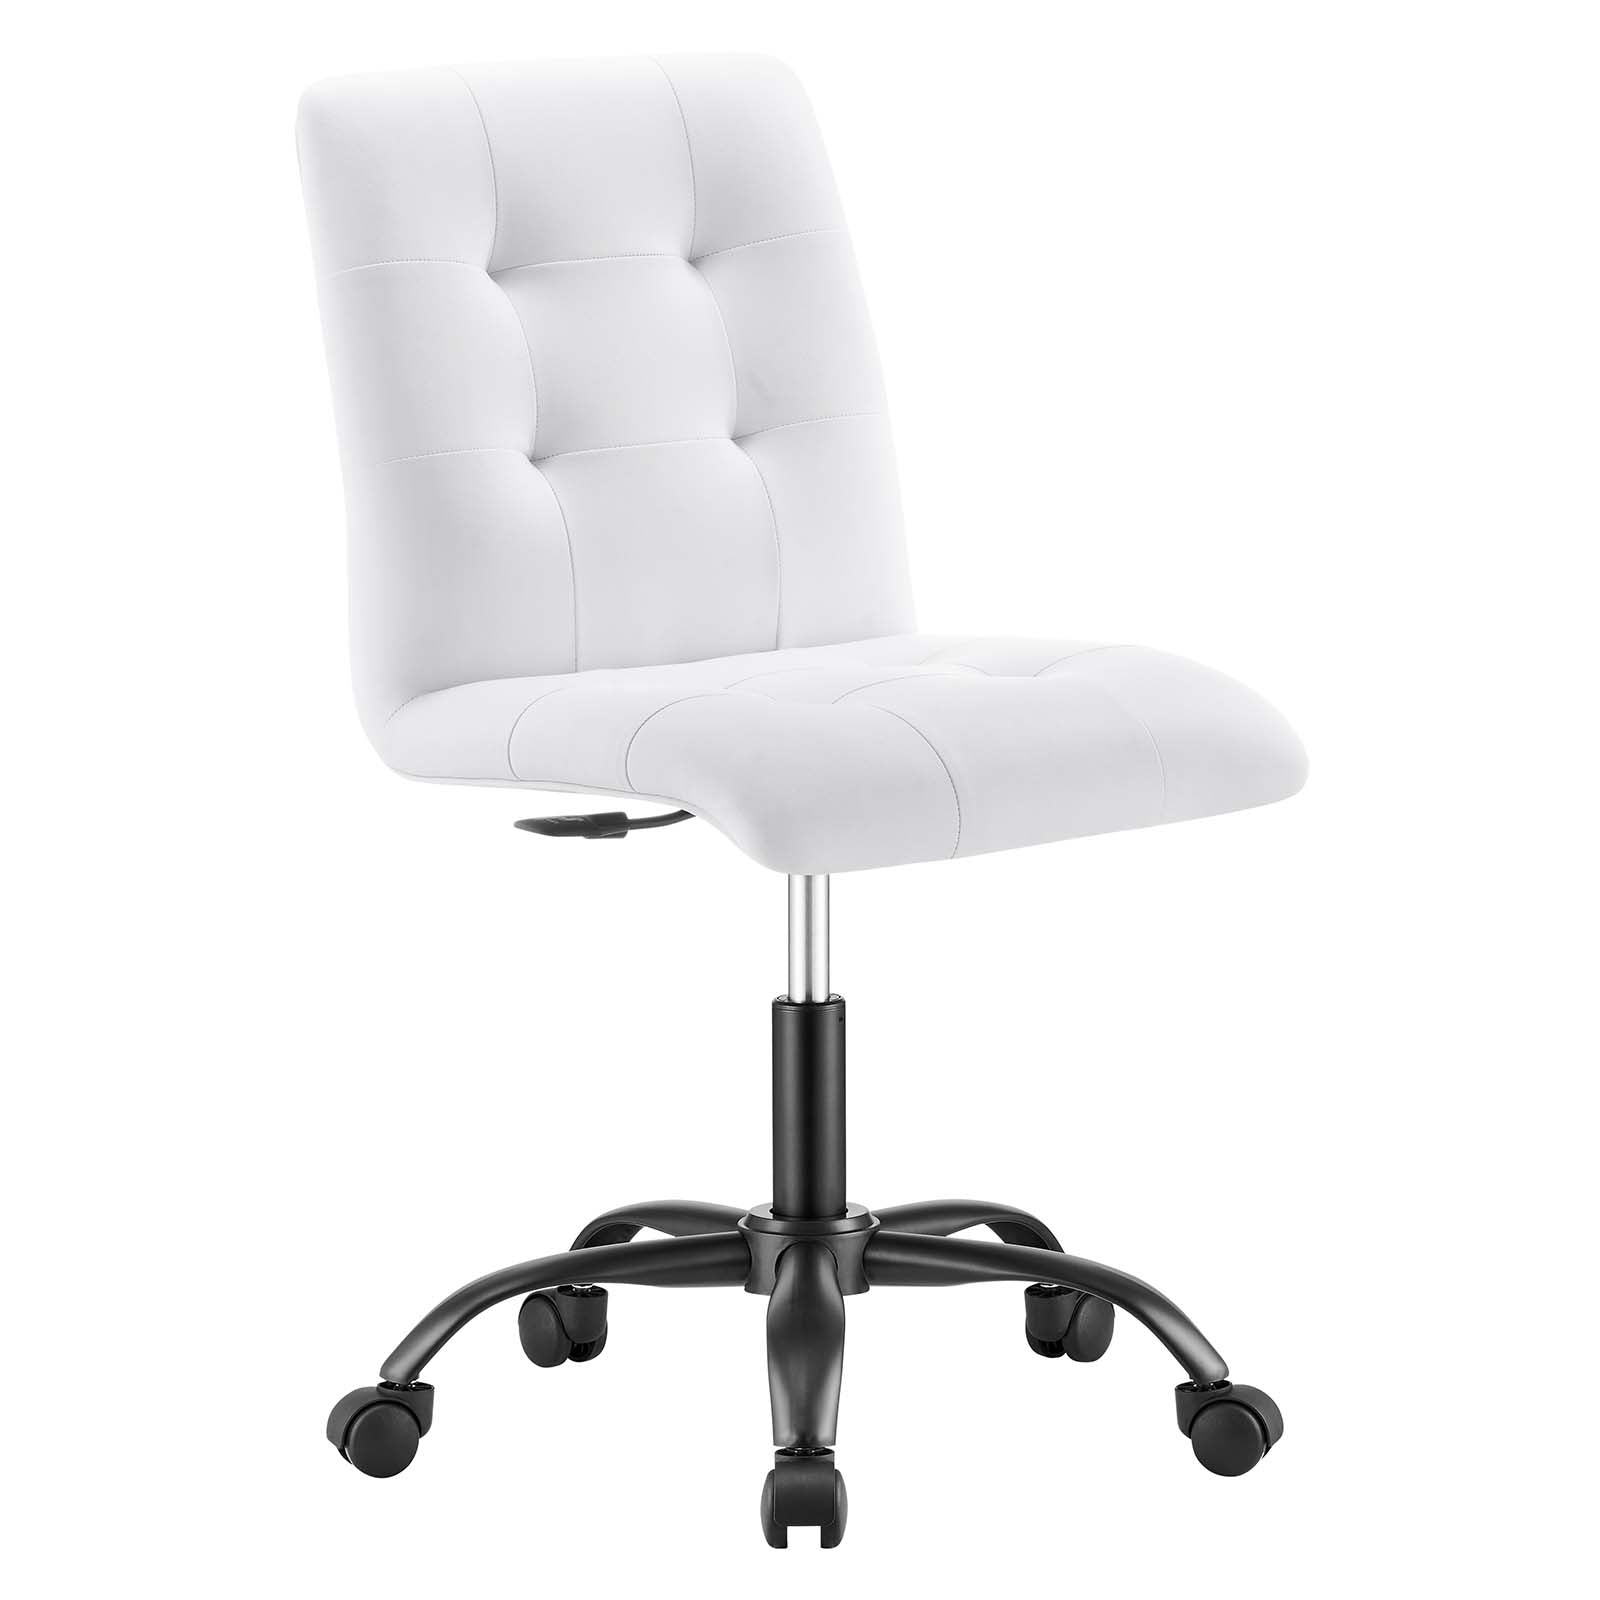 Modway Task Chairs - Prim-Armless-Vegan-Leather-Office-Chair-Black-White